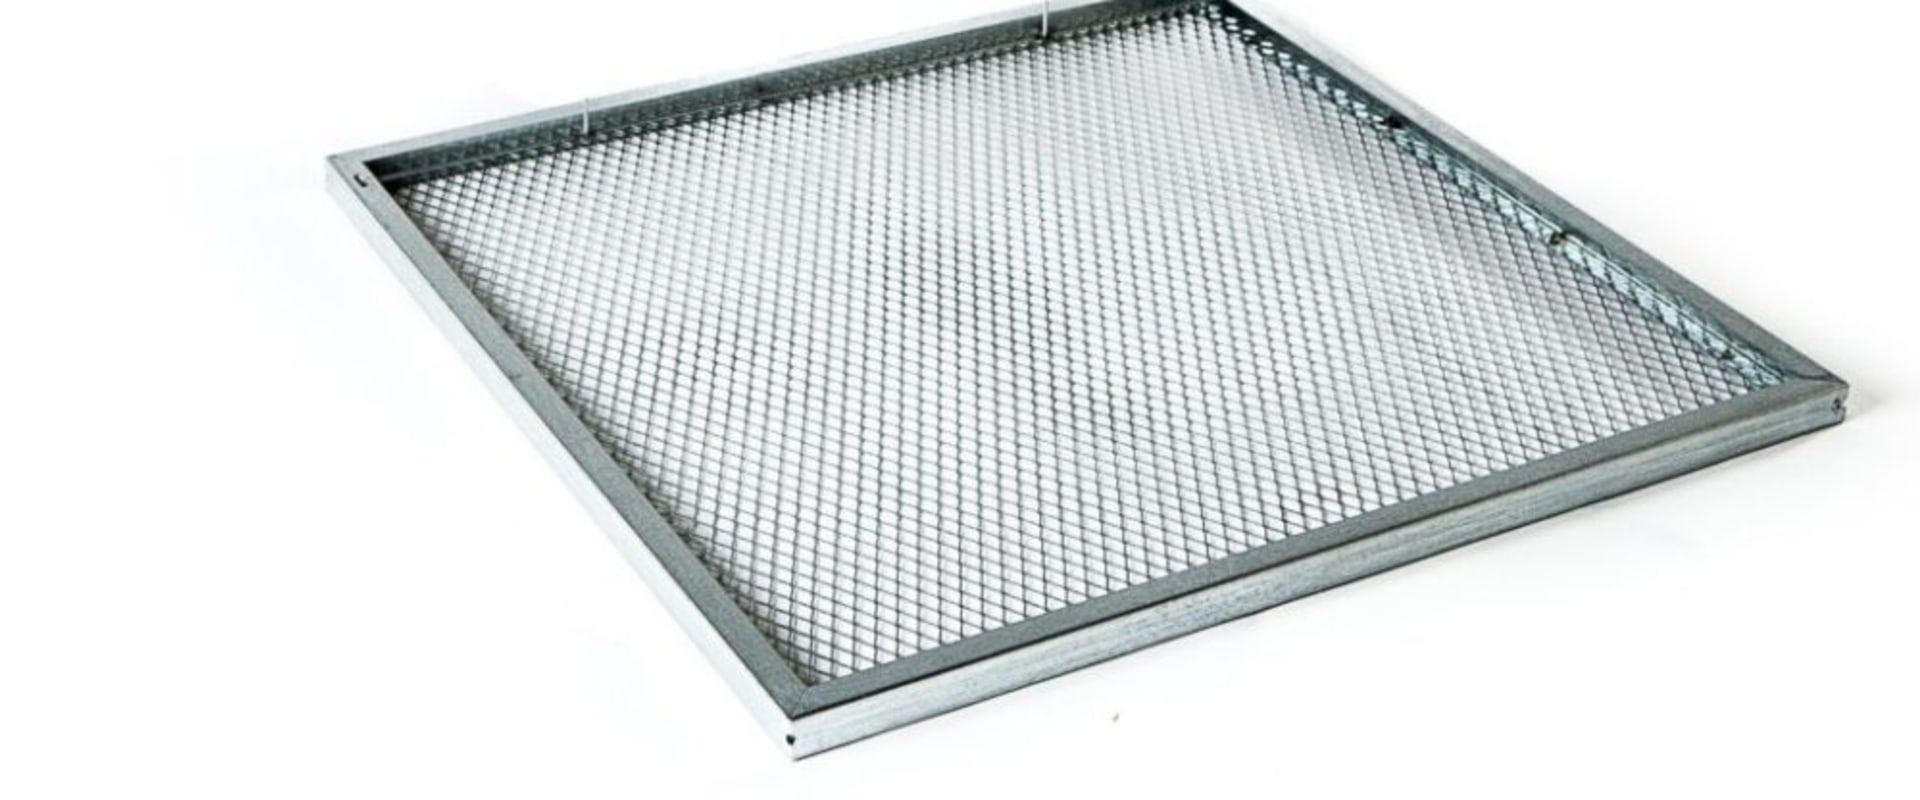 The Benefits of 18x18x1 Air Filters